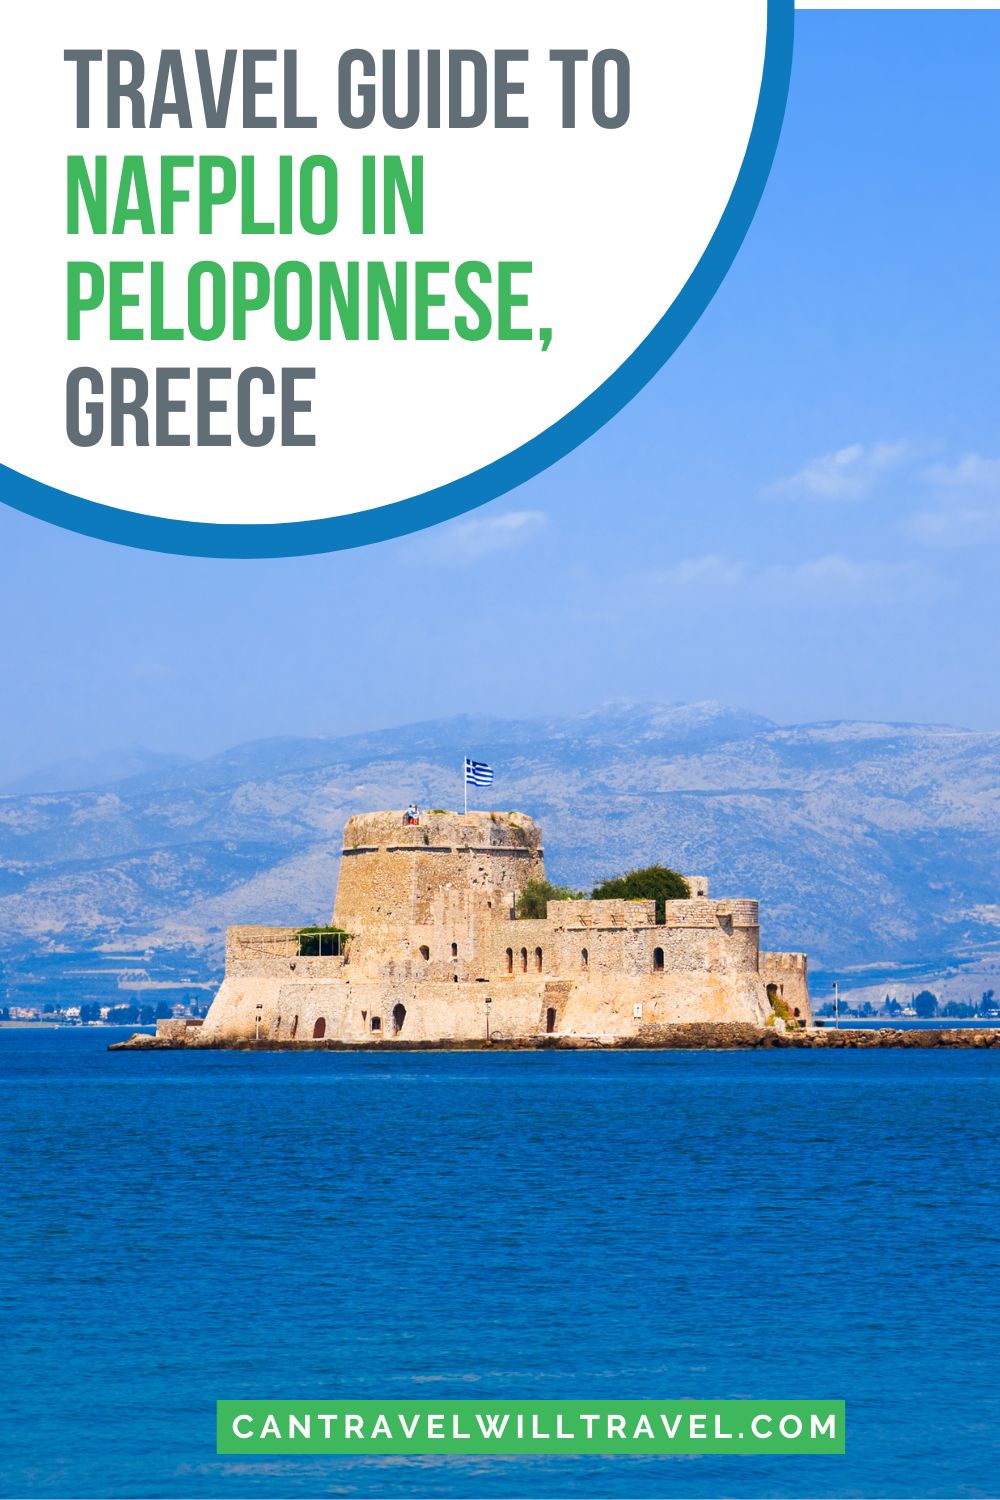 Travel Guide to Nafplio in Peloponnese, Greece